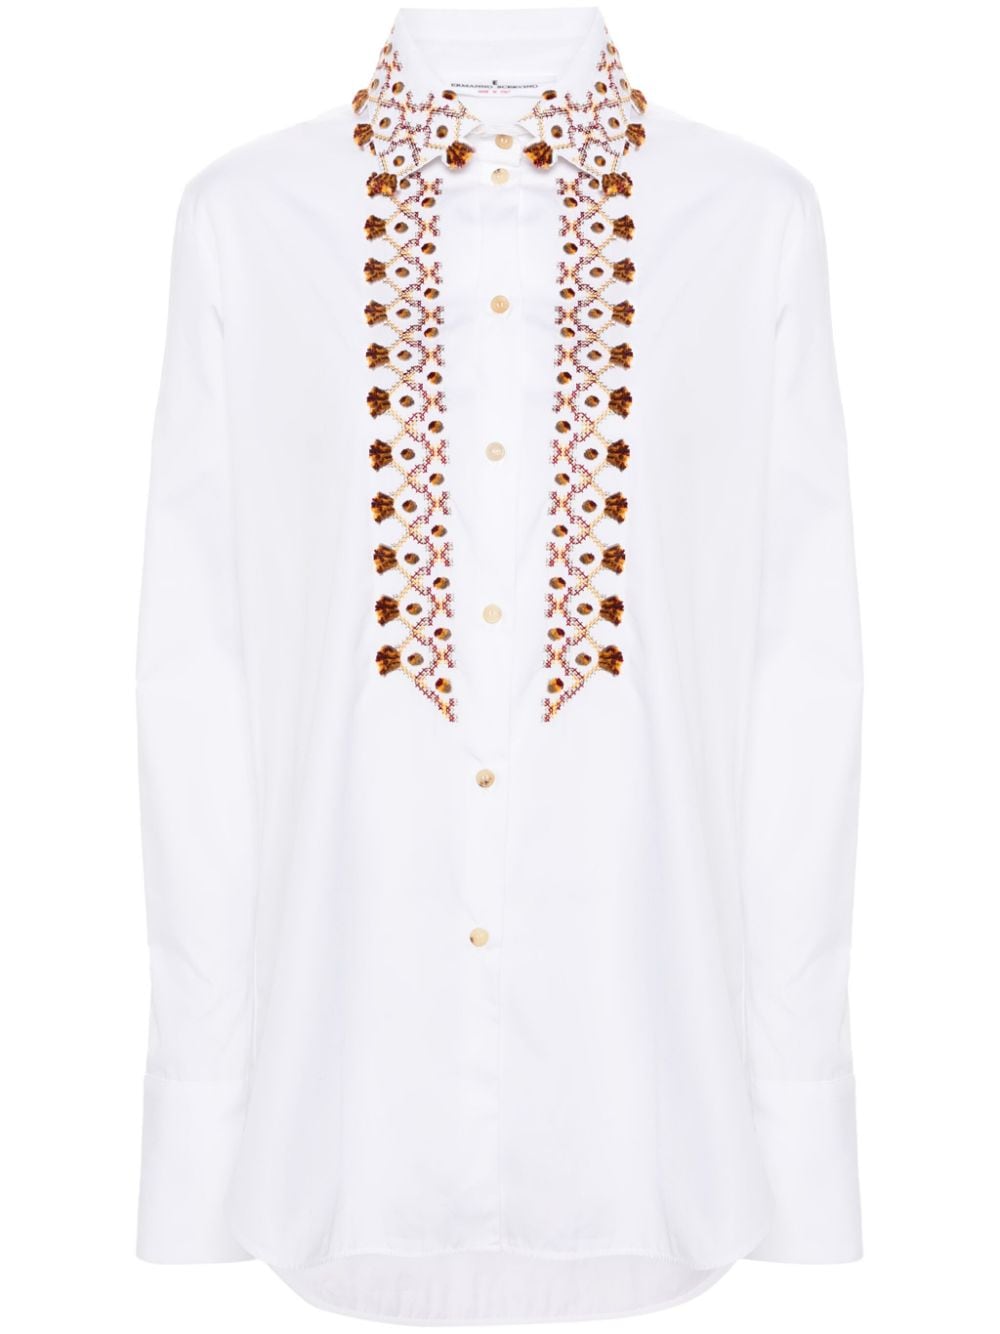 Cotton shirt with front embroidery